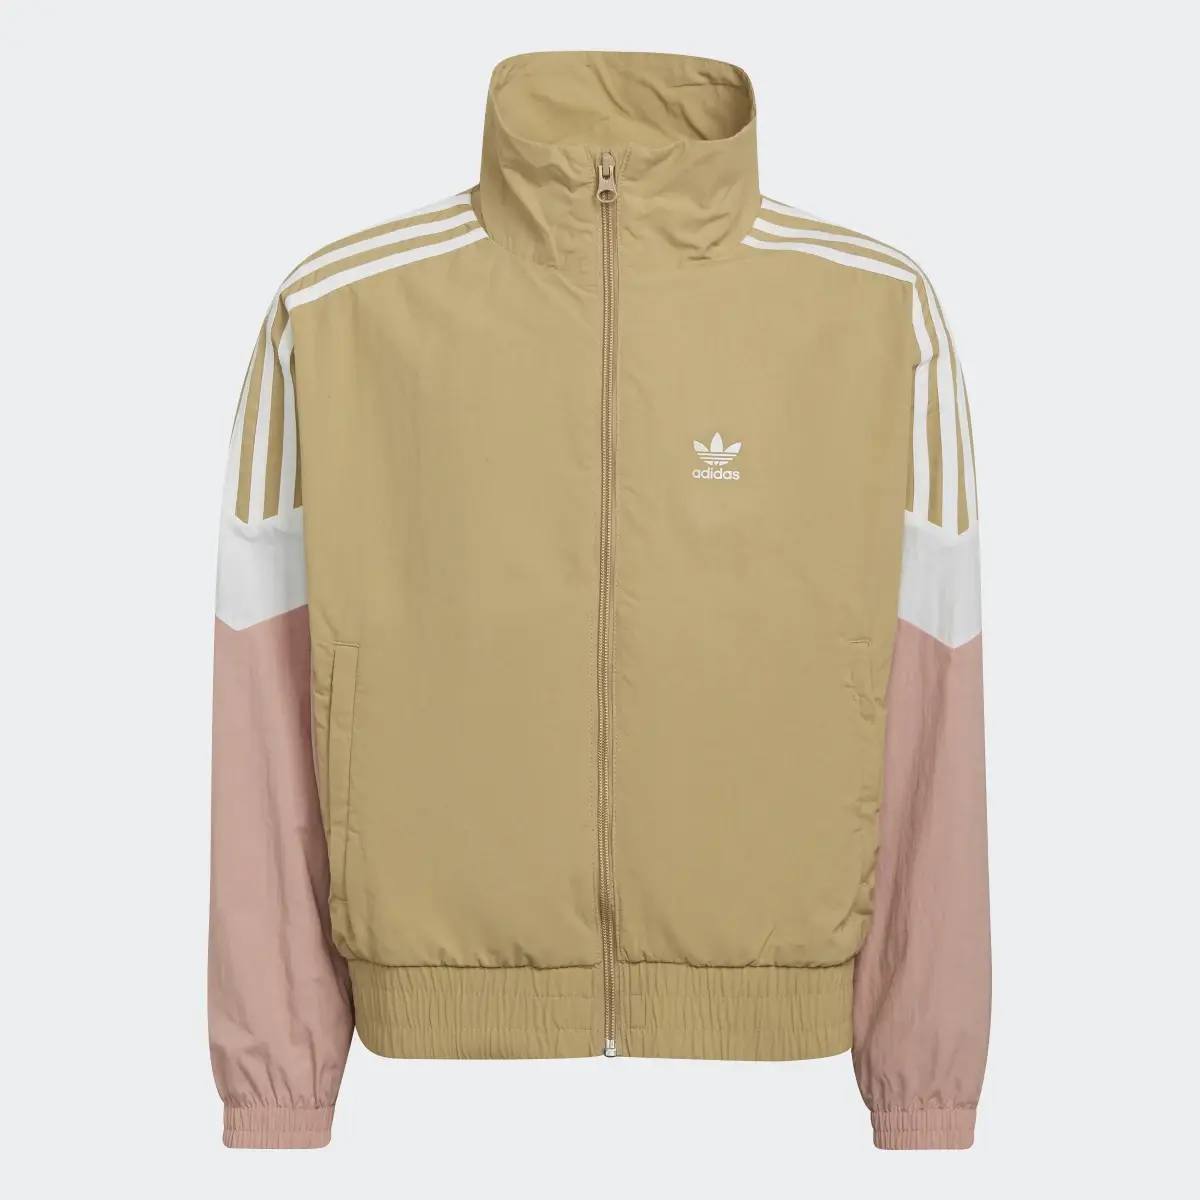 Adidas Track top Woven. 1